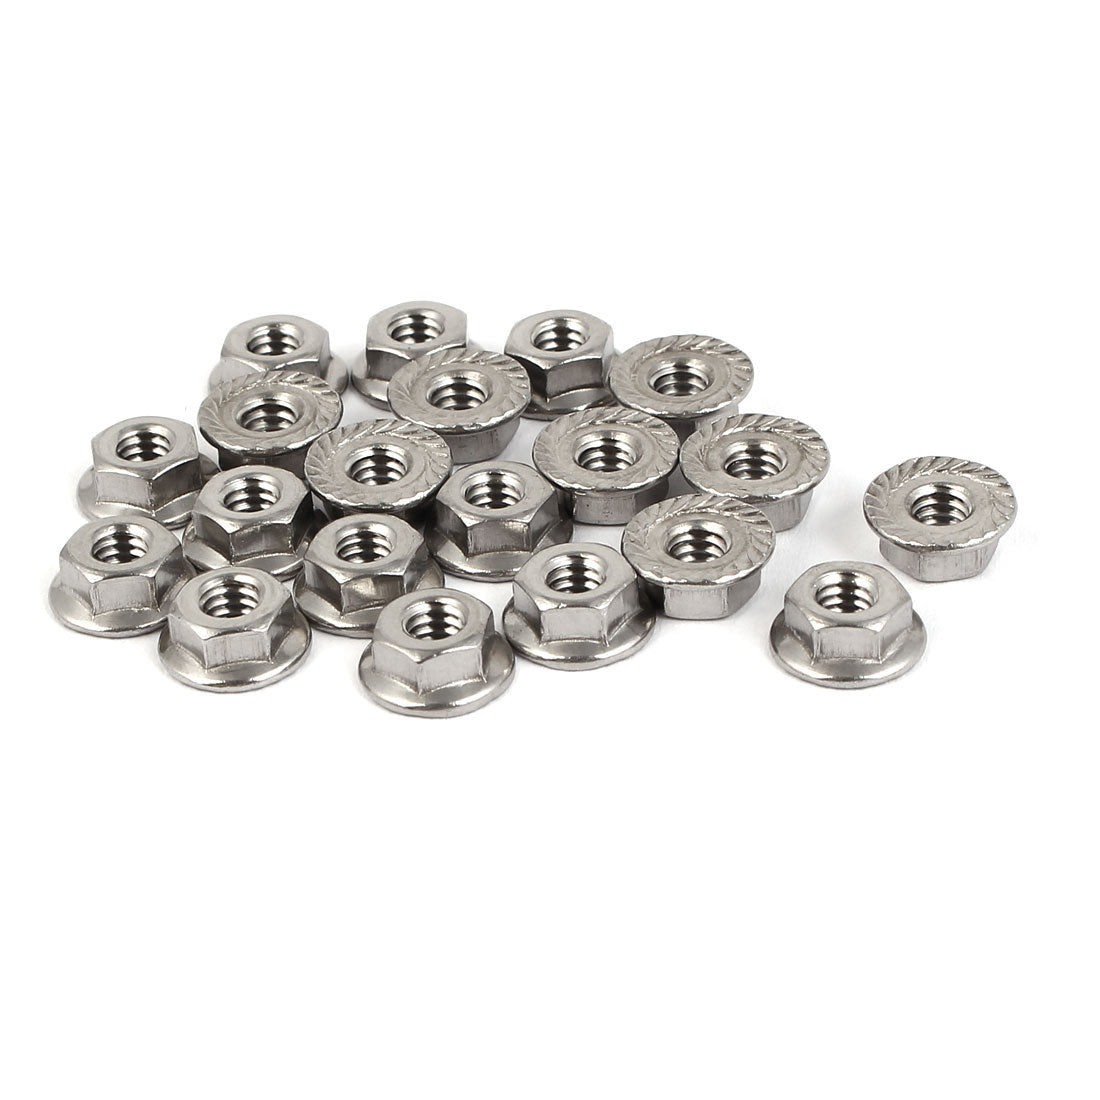 Uxcell Uxcell 8#32 304 Stainless Steel Serrated Flange Hex Machine Screw Lock Nuts 20pcs